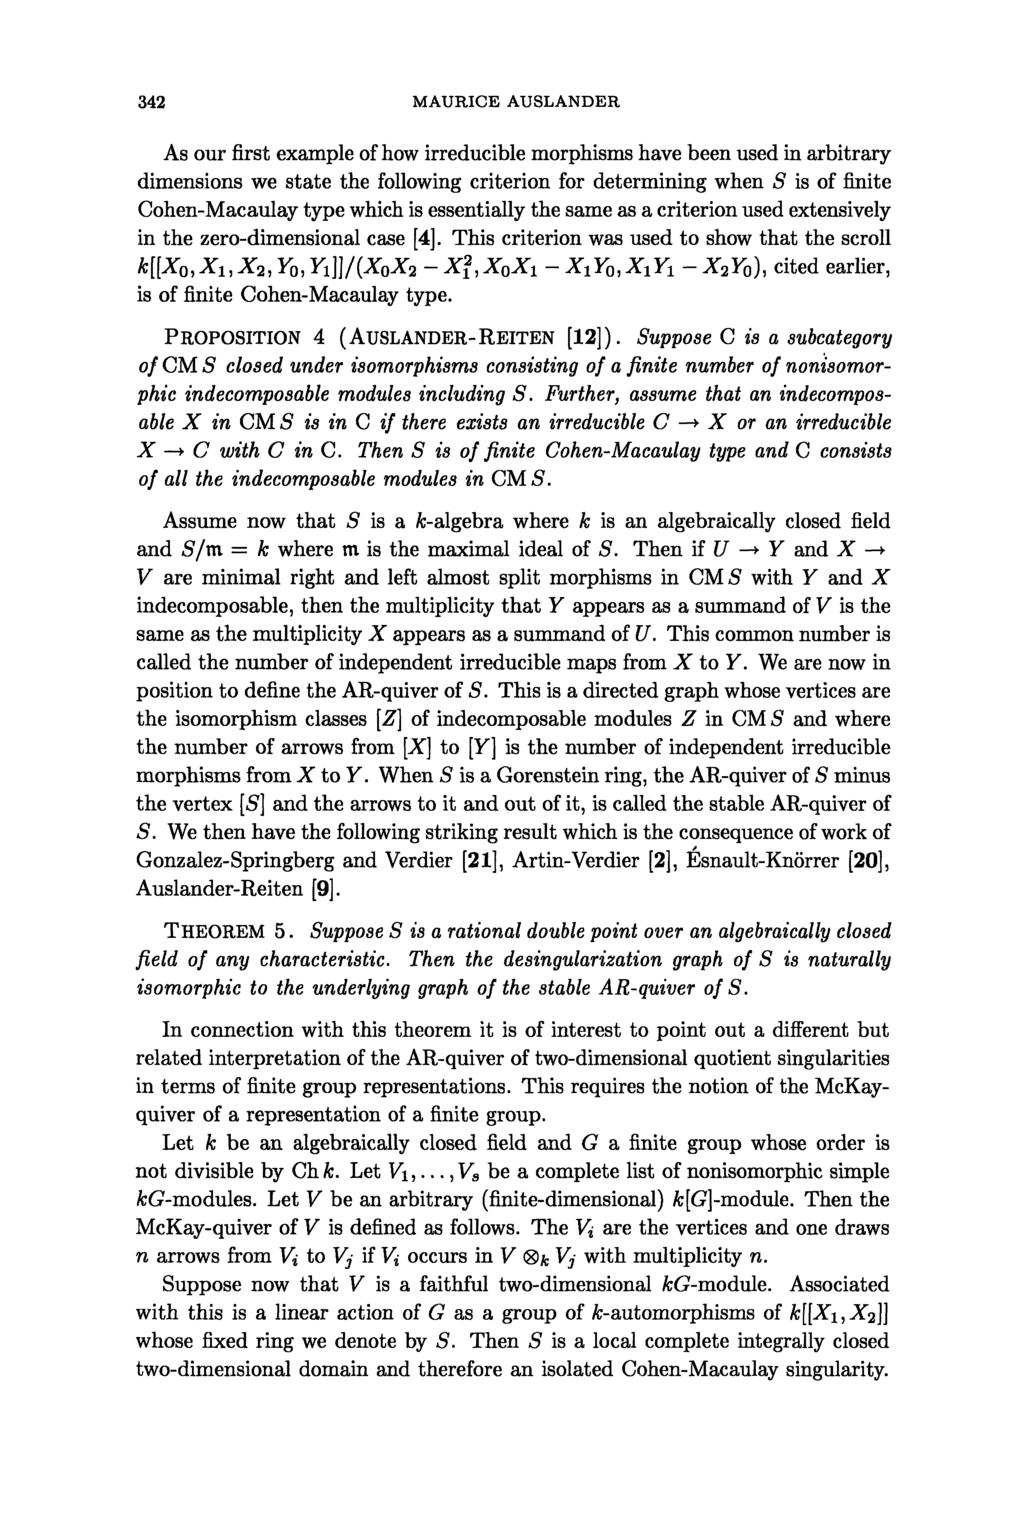 342 MAURICE AUSLANDER As our first example of how irreducible morphisms have been used in arbitrary dimensions we state the following criterion for determining when S is of finite Cohen-Macaulay type